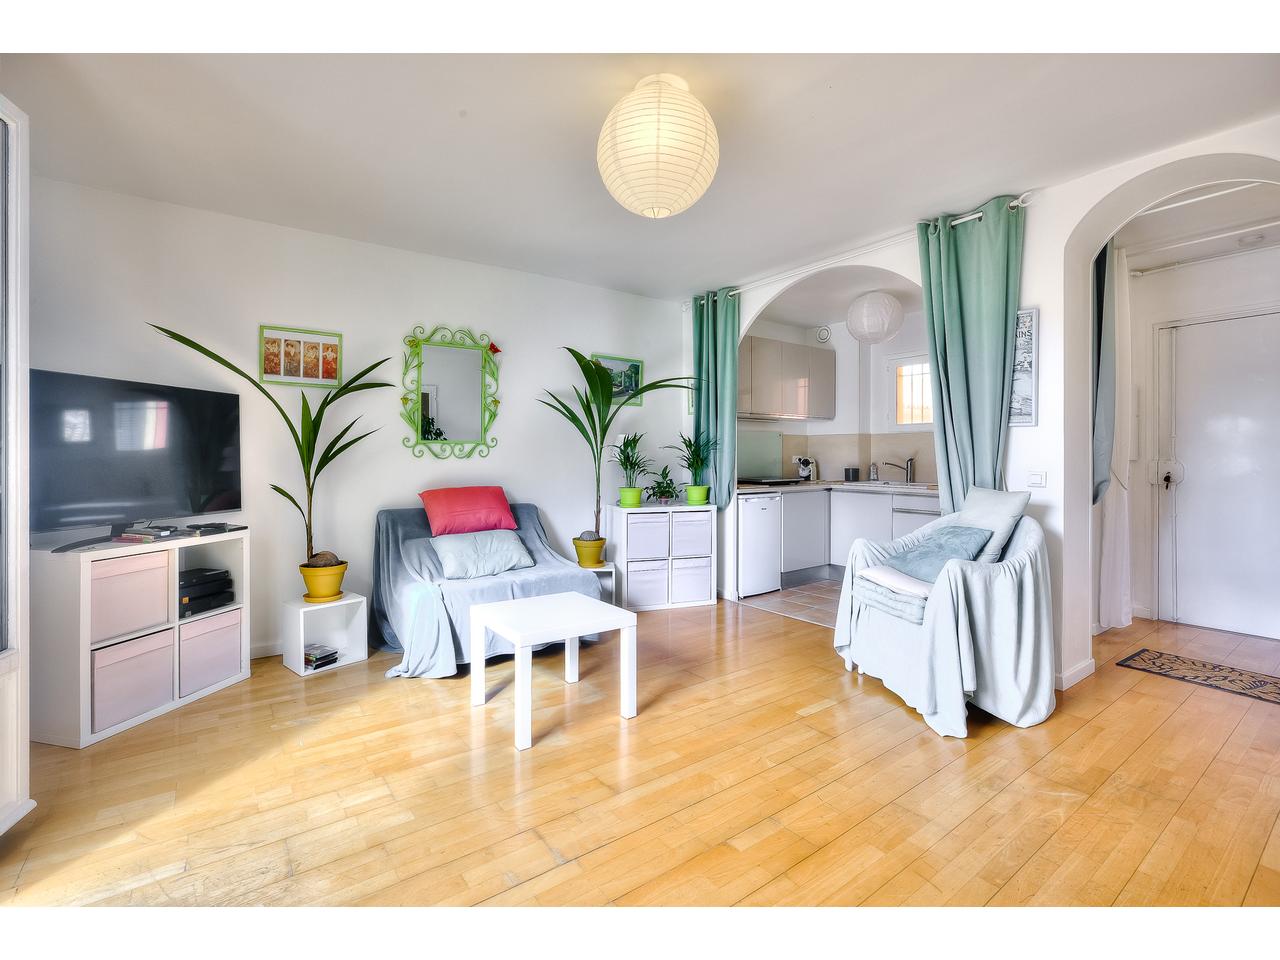 Nice Riviera - Real estate agency Nice Côte d'Azur | Appartement  2 Rooms 45.53m2  for sale   370 000 €